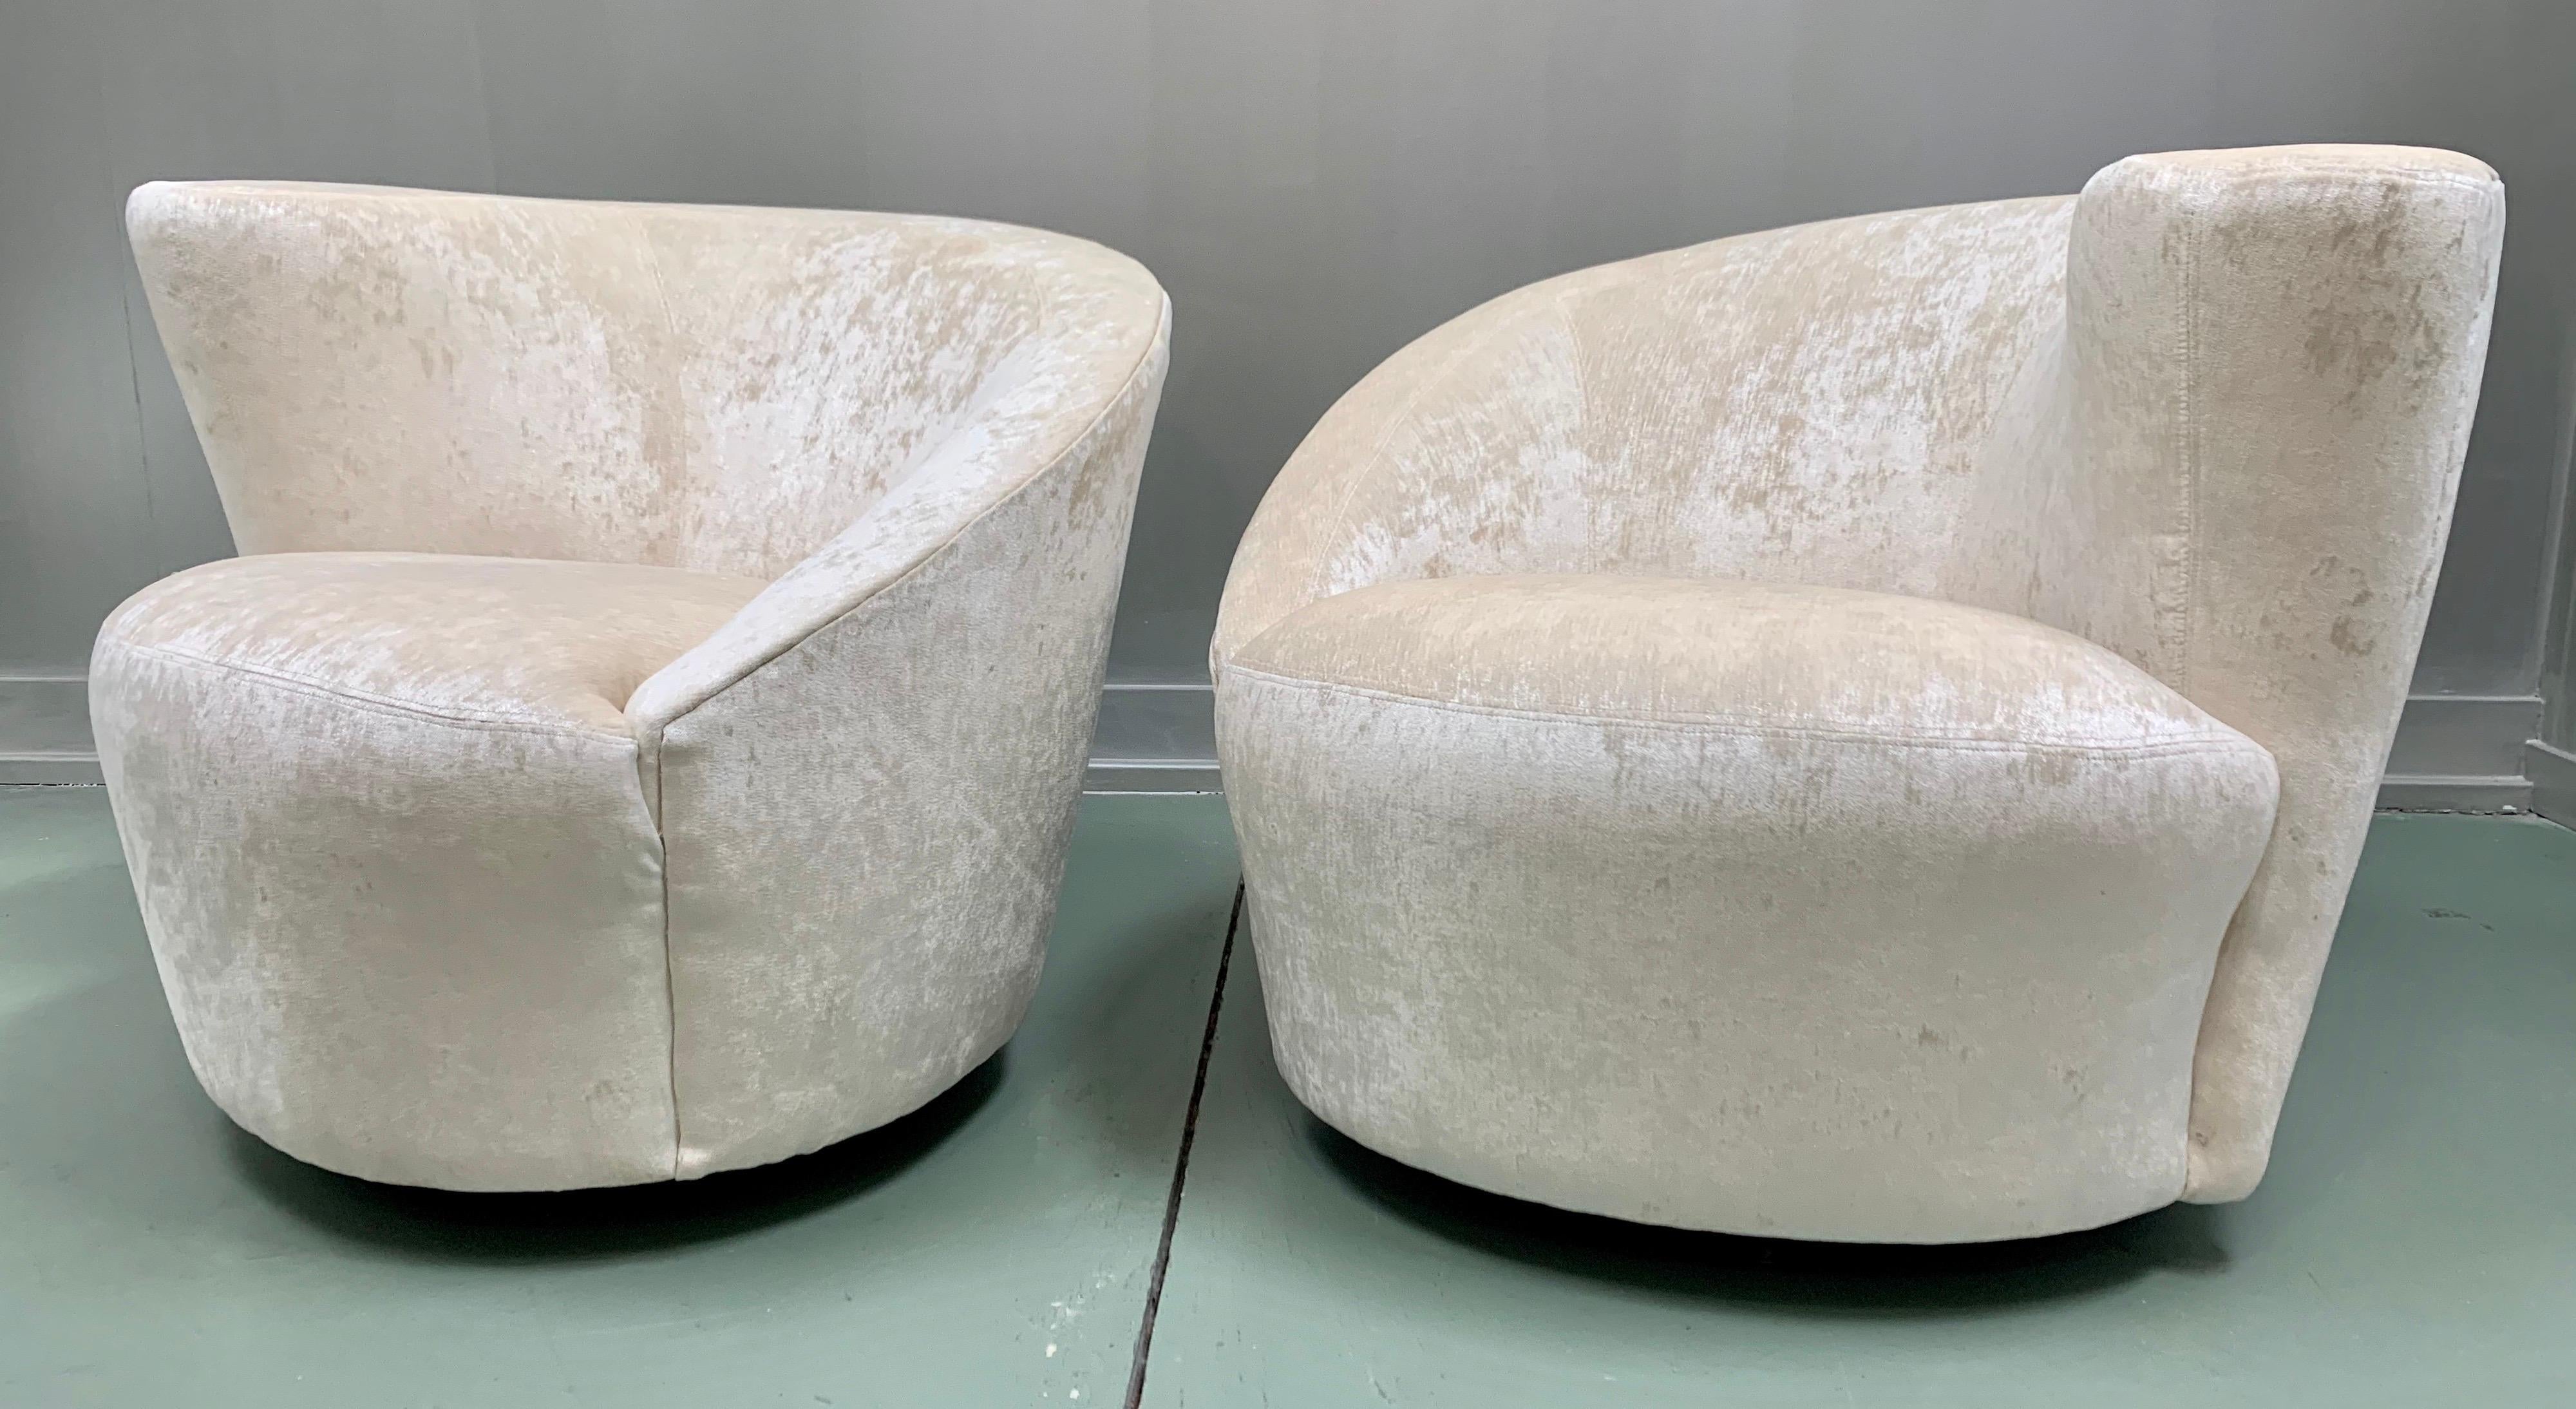 Magnificent pair of newly upholstered Kagan Nautilus swivel chairs. The fabric is an off white or cream velvet that is gorgeous. The ultimate in comfort and design and one of the true iconic midcentury pieces today.